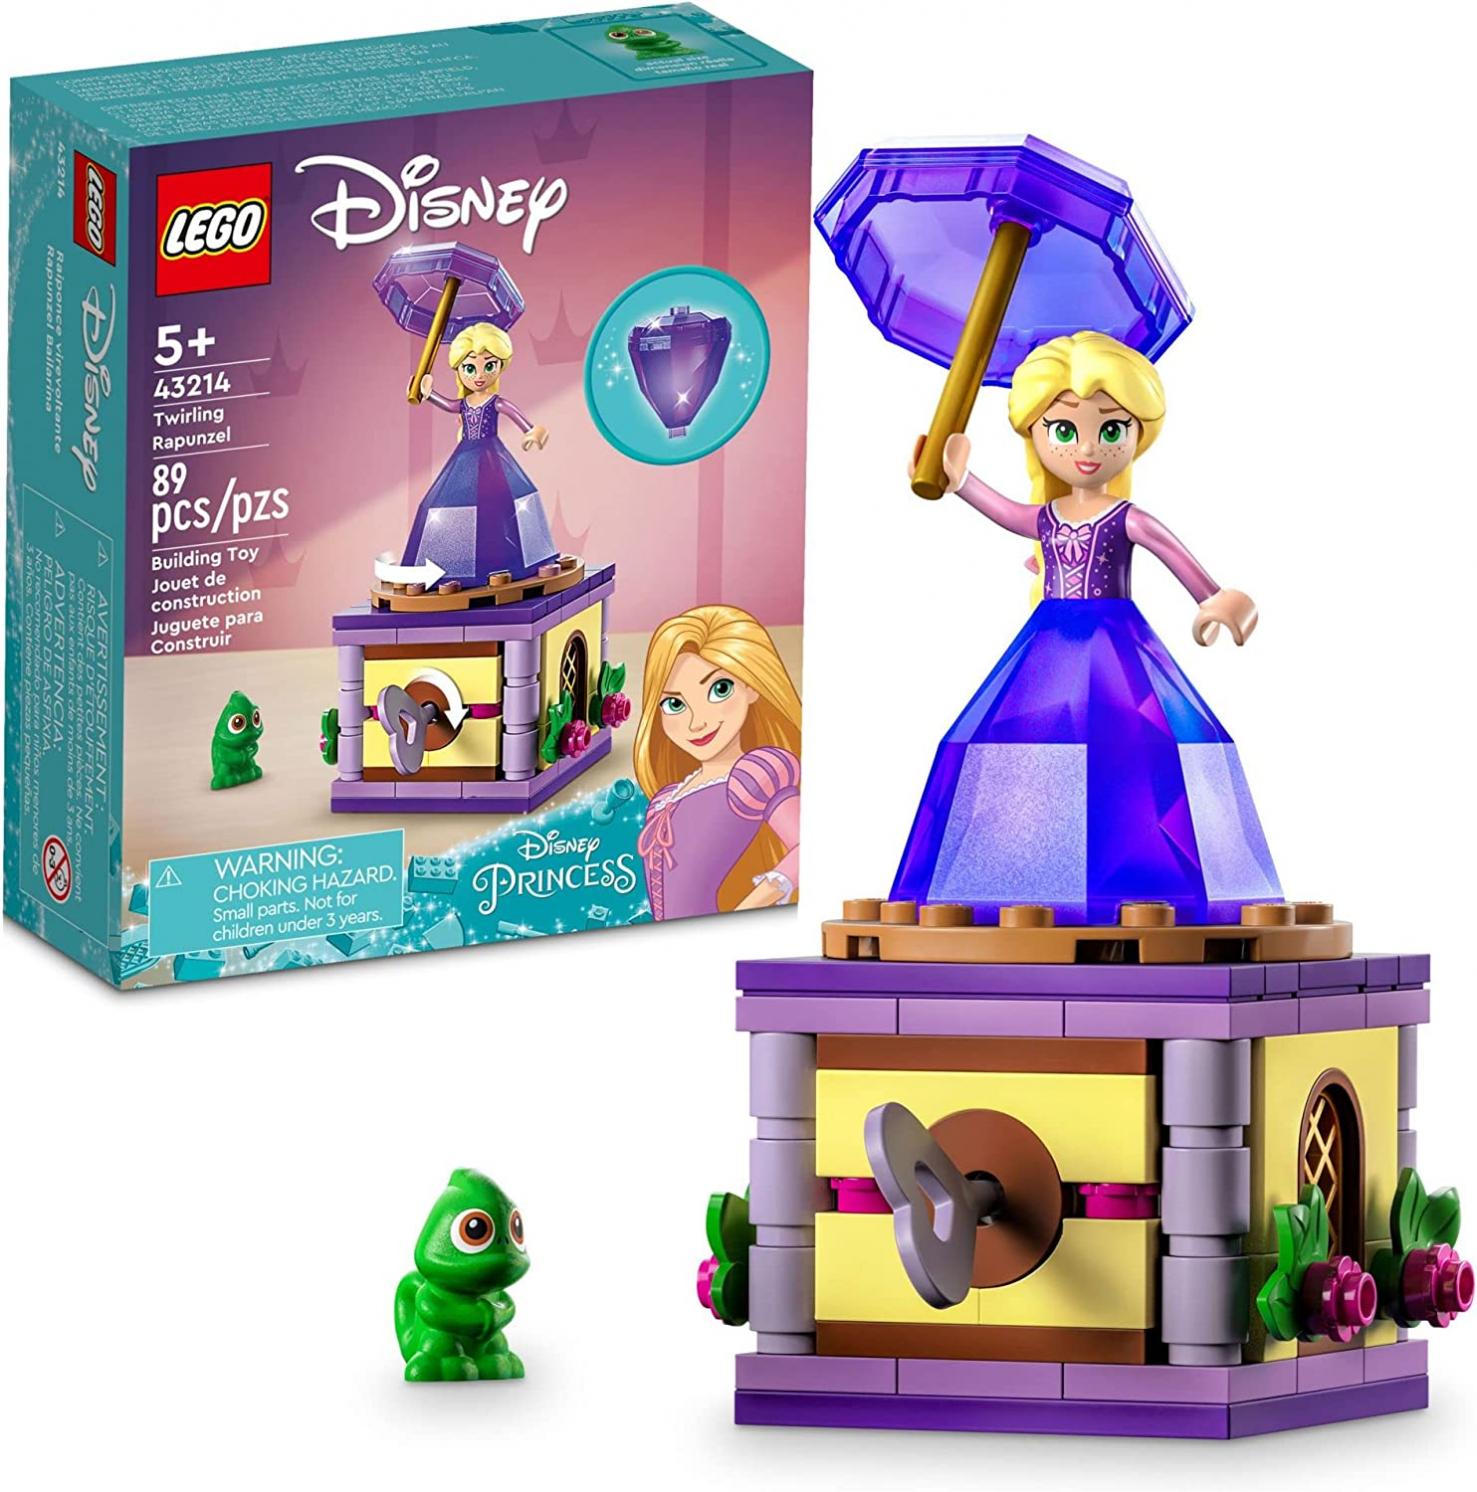 LEGO Disney Princess Twirling Rapunzel 43214, Buildable Toy with Diamond Dress Mini-Doll and Pascal The Chameleon Figure, Collectible Toys for Girls & Boys